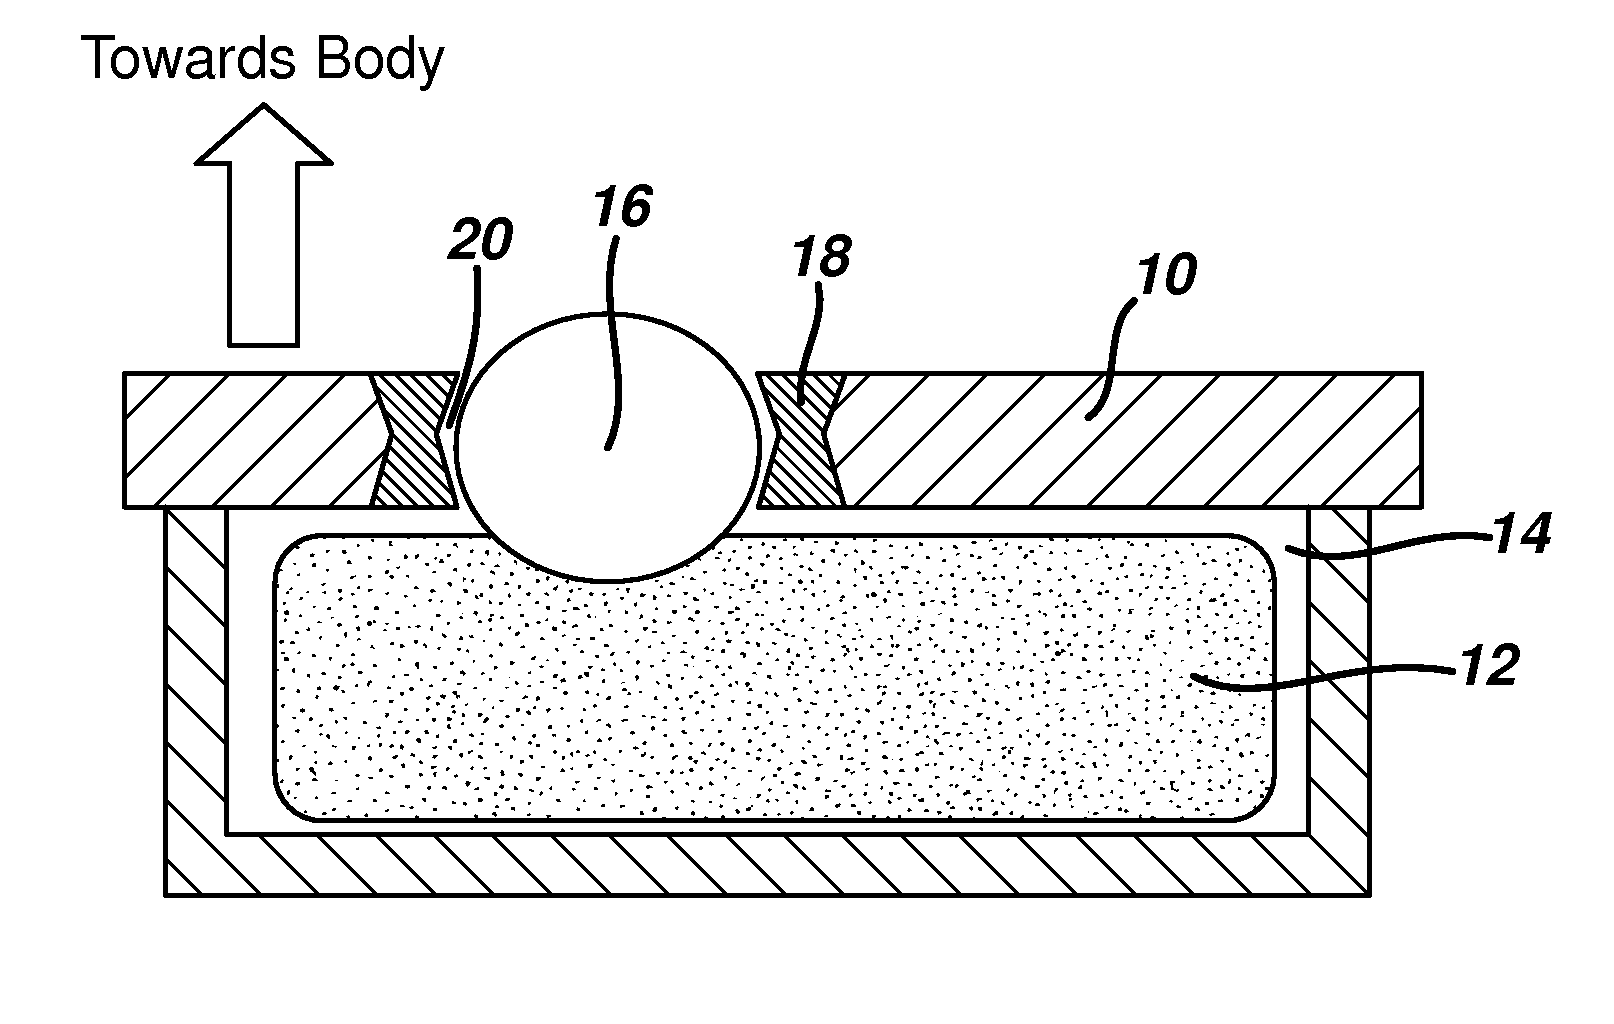 Thermal treatment device